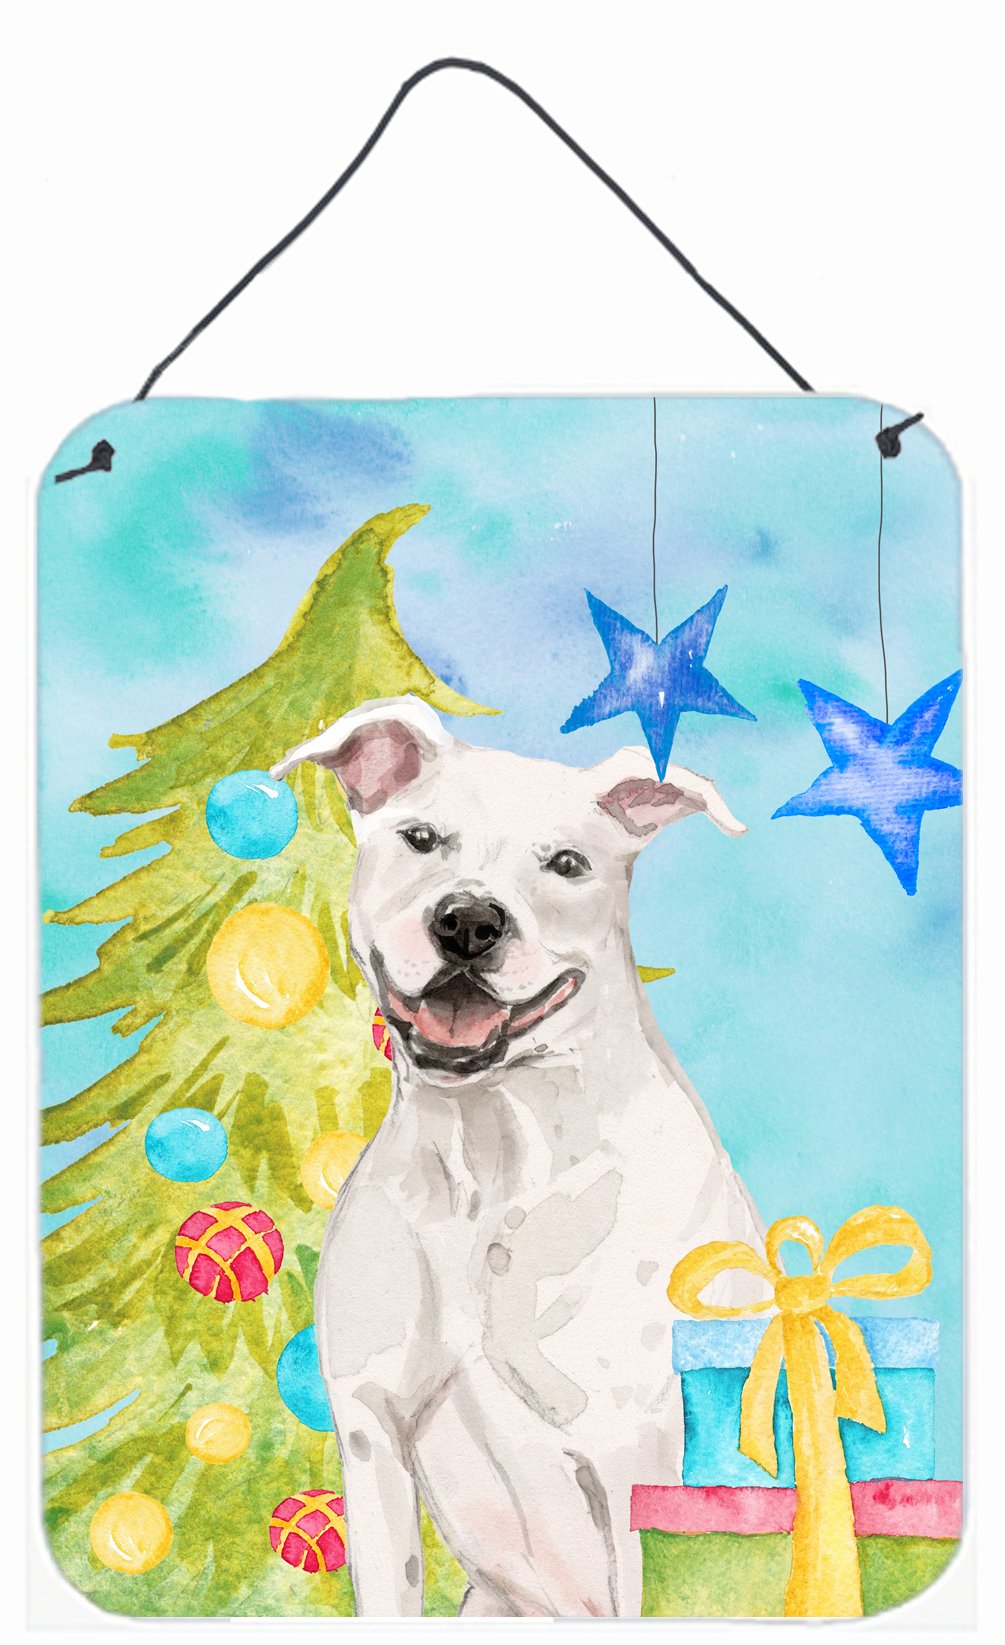 White Staffie Bull Terrier Christmas Wall or Door Hanging Prints BB9396DS1216 by Caroline's Treasures